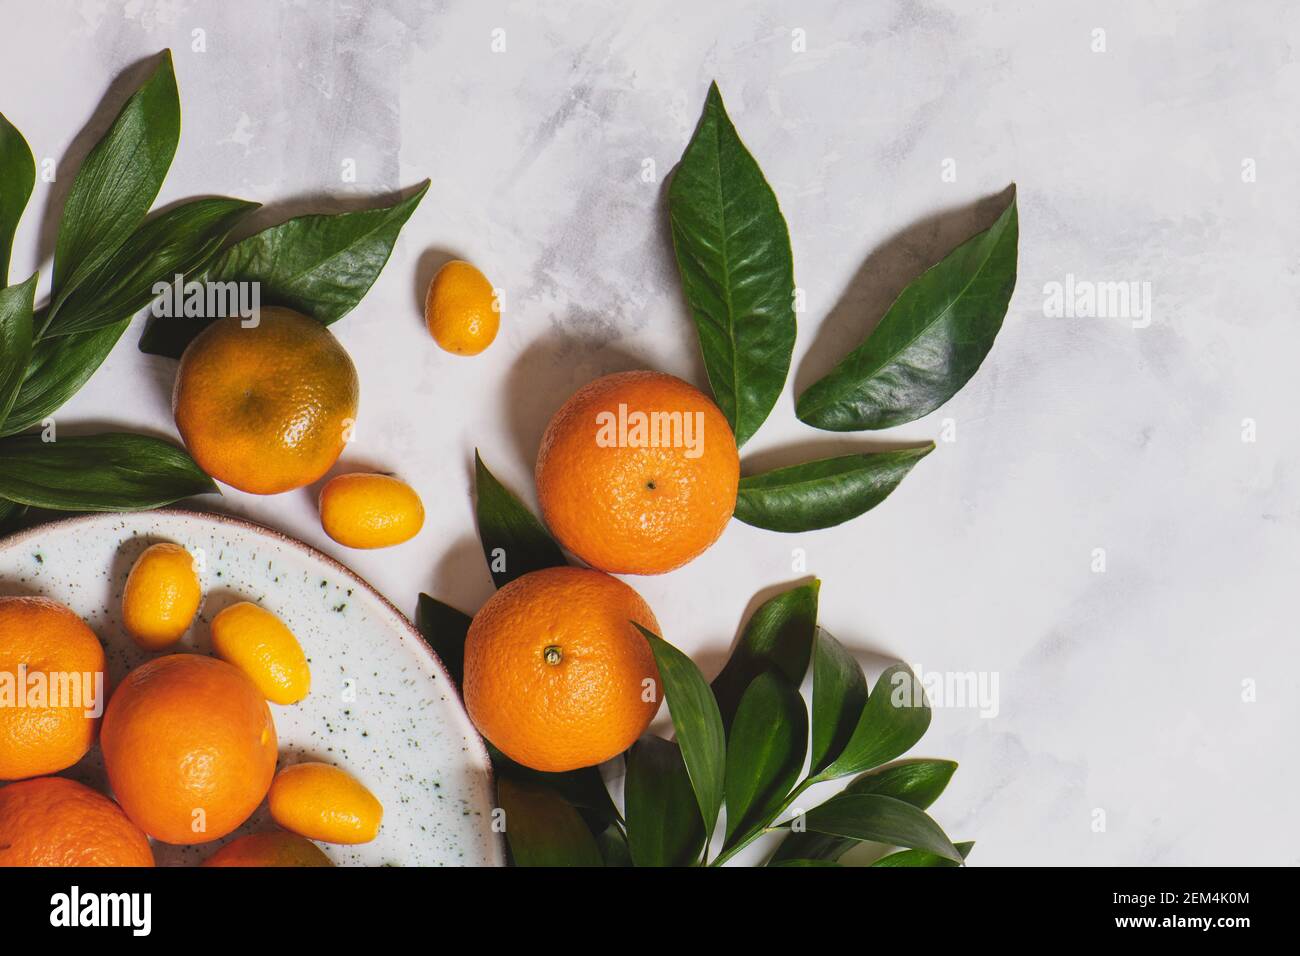 Citrus fruit with green leaves in a white plate on marble background. Stock Photo